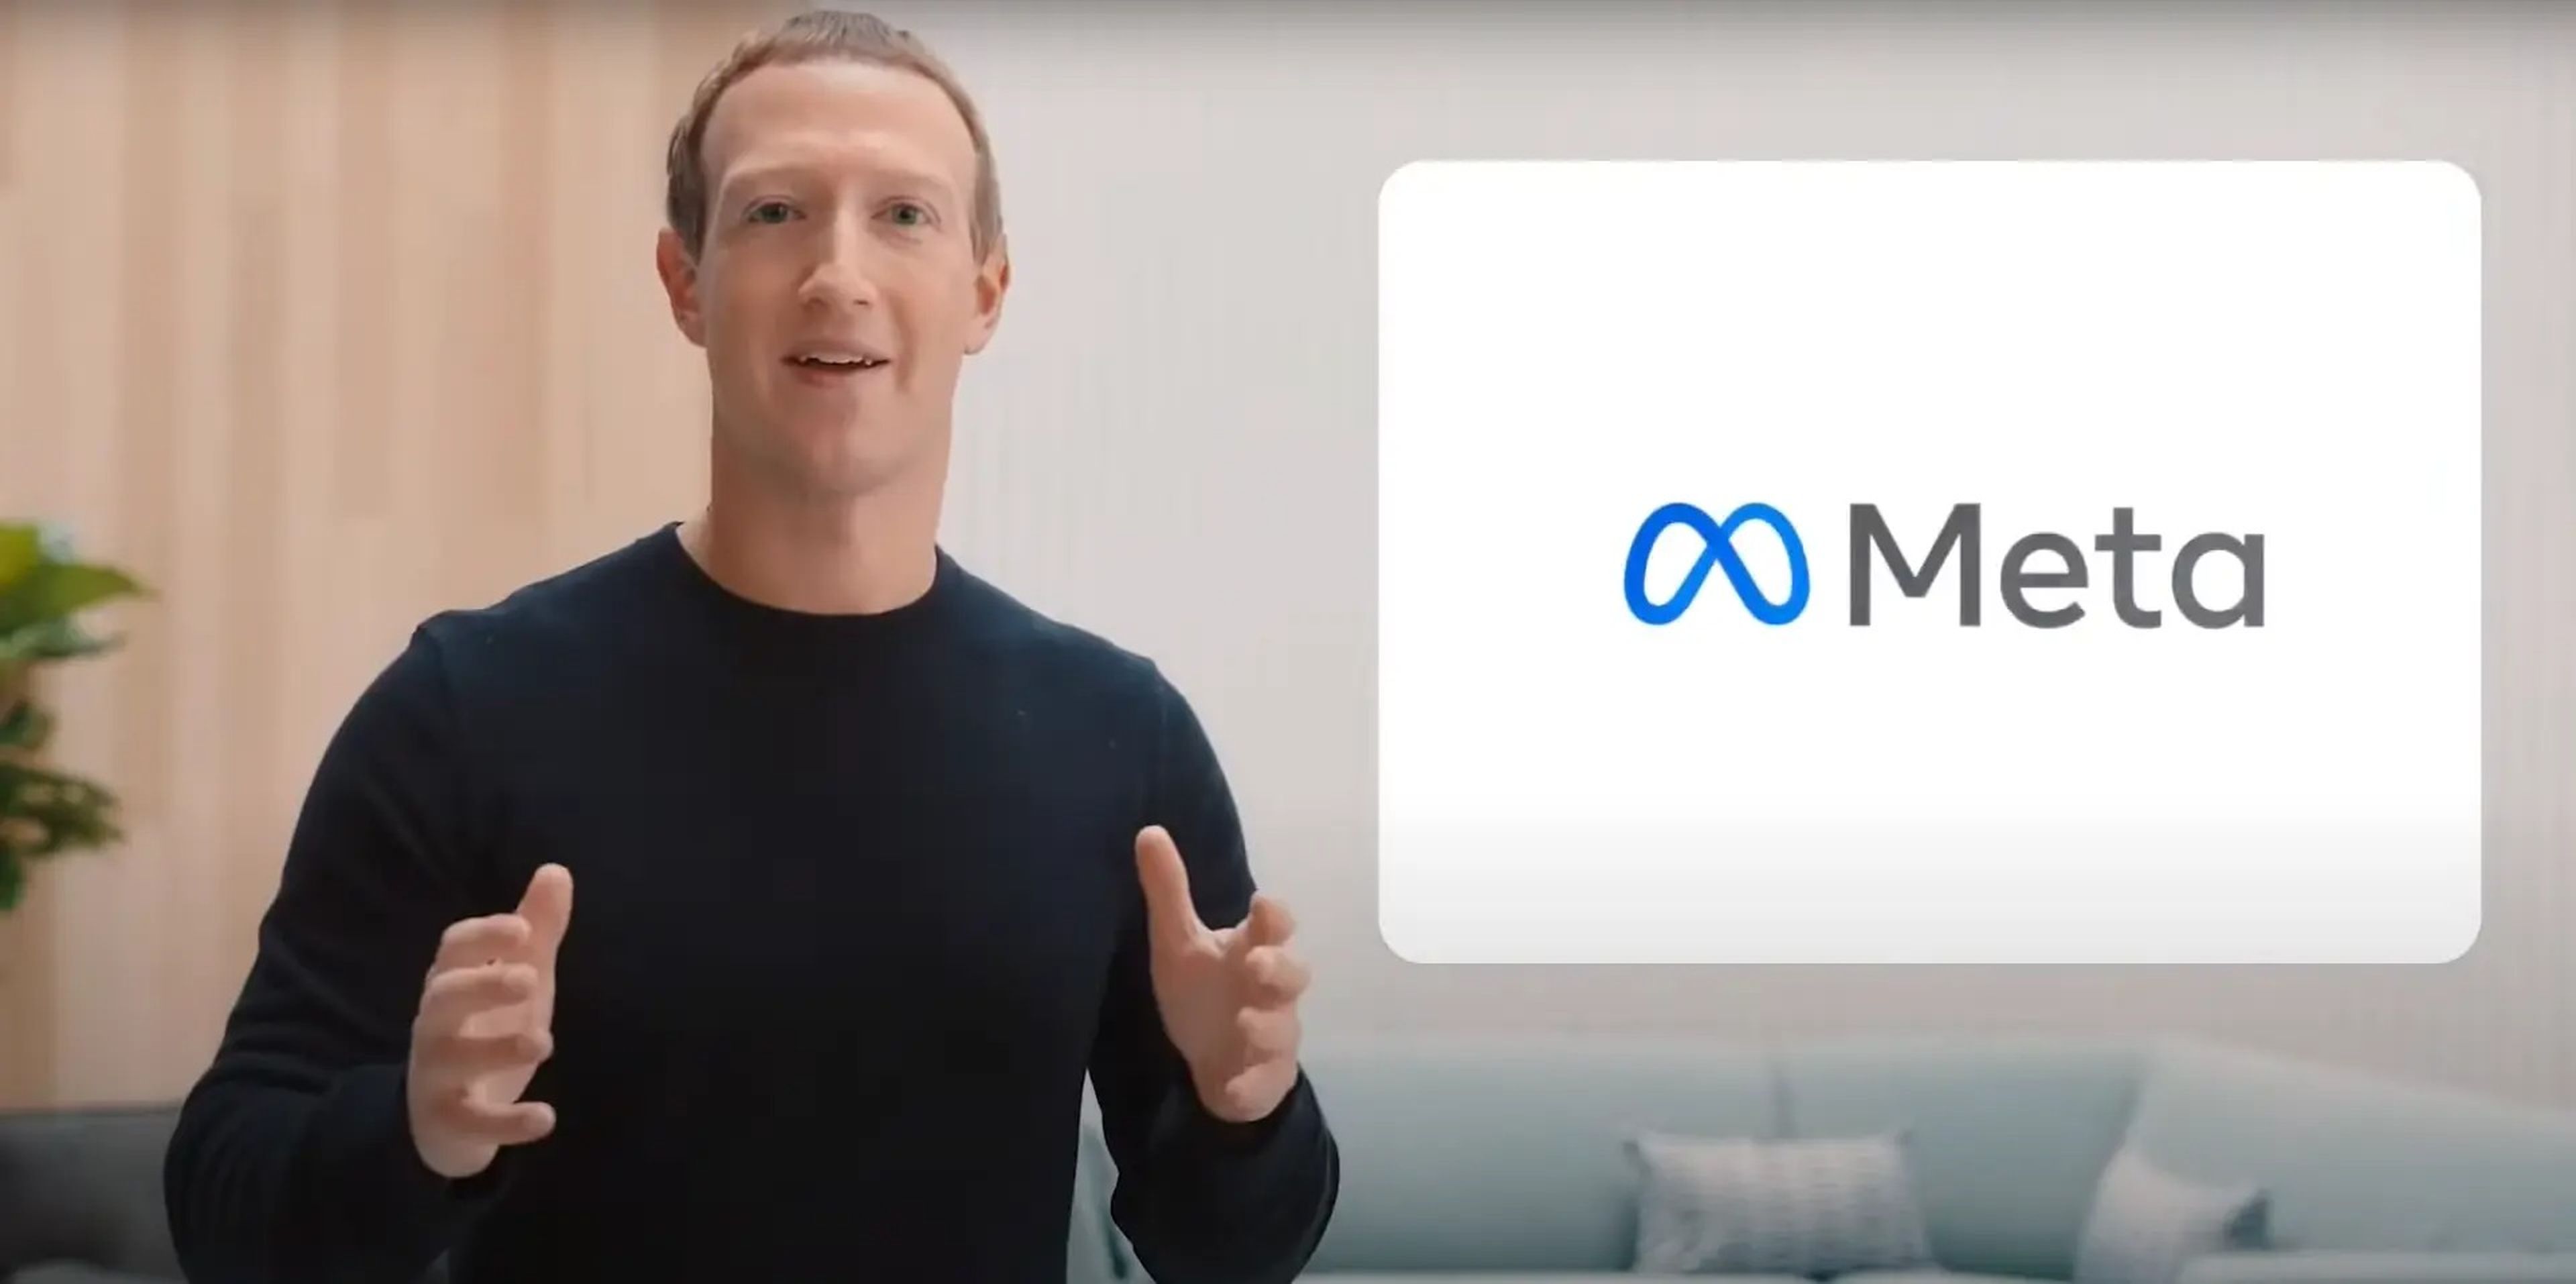 Facebook CEO Mark Zuckerberg announced the company's name change to "Meta" in an October 2021 video.